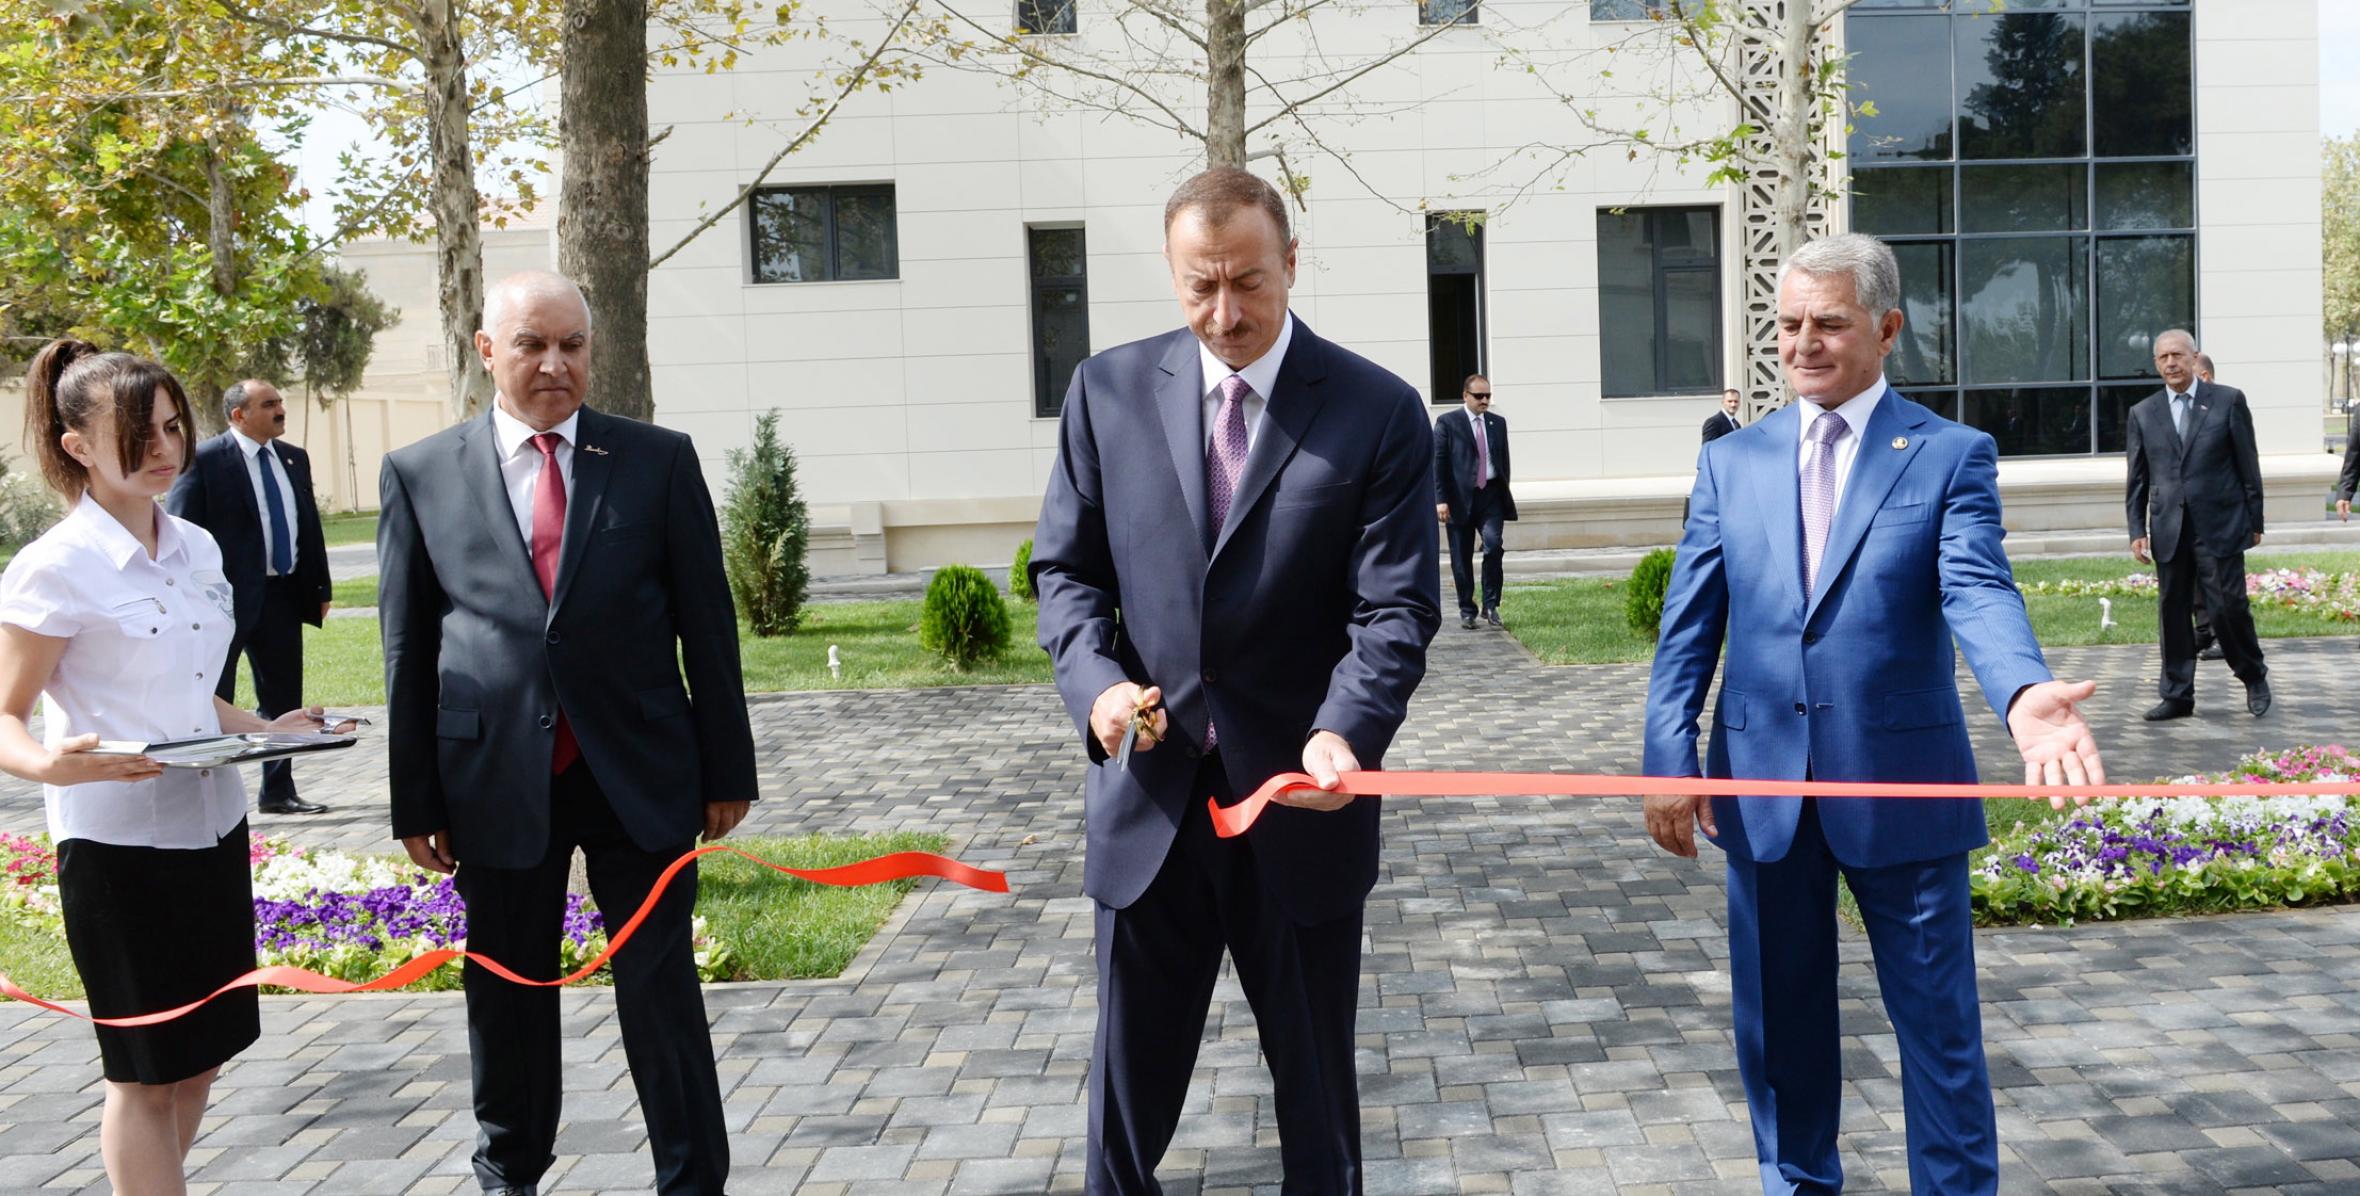 Ilham Aliyev attended the opening of a new office building of the Bilasuvar District branch of the "Yeni Azerbaijan Party"